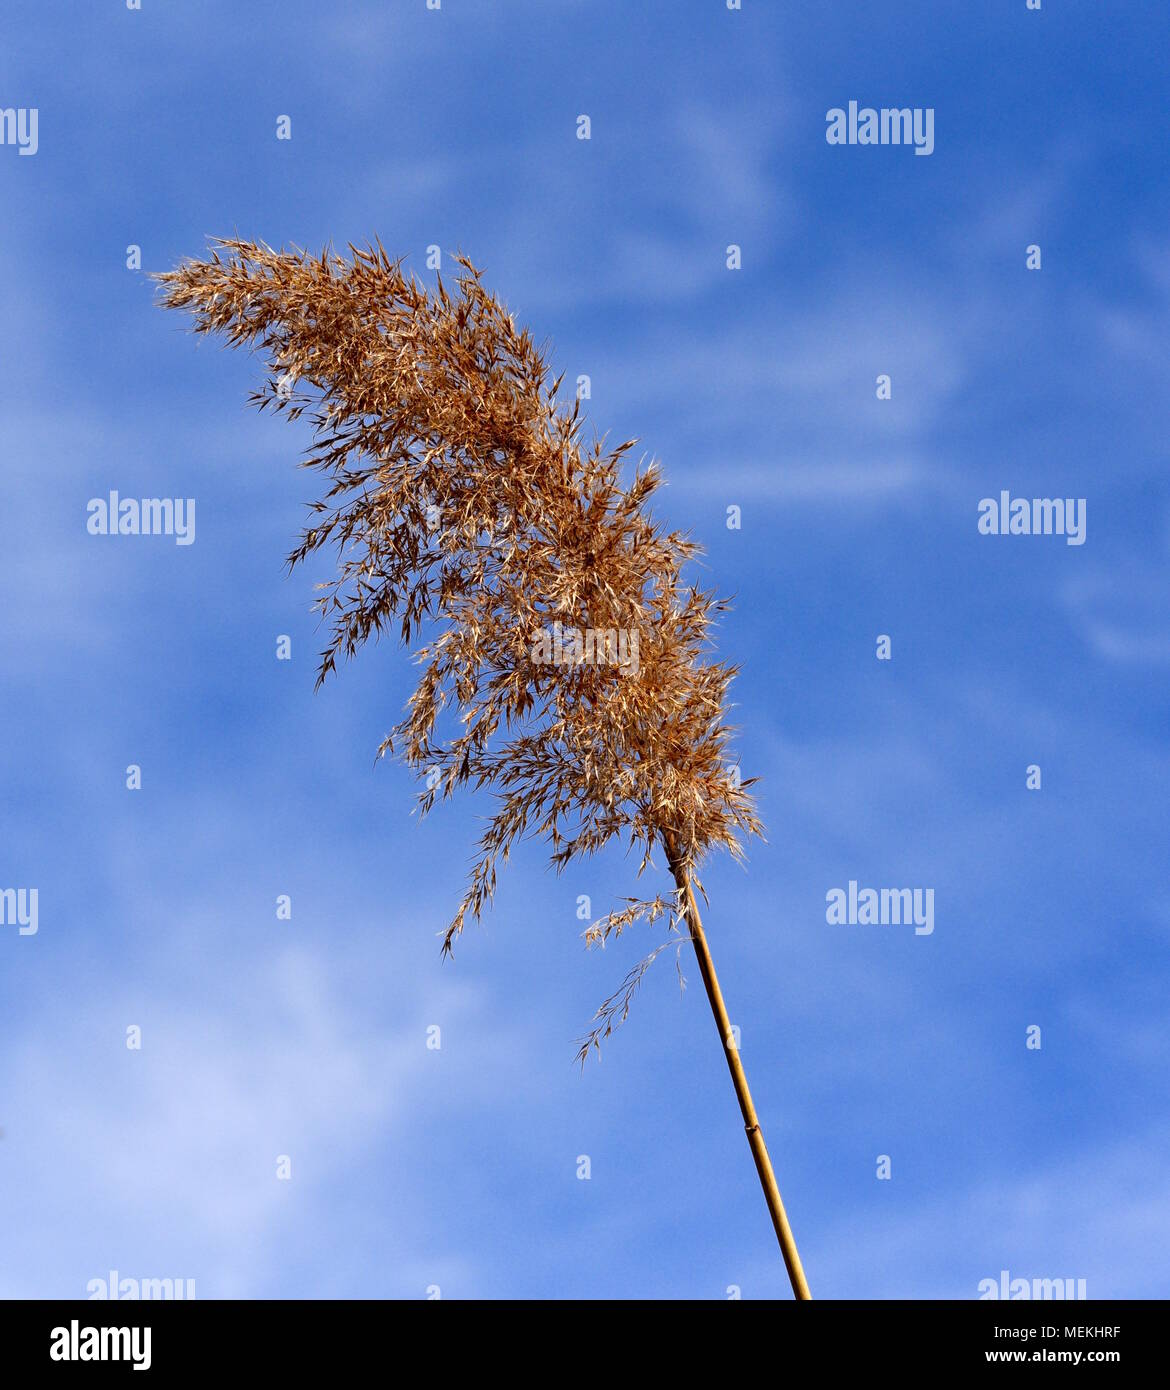 Common reed grass seed head silhouetted against a blue sky. Stock Photo